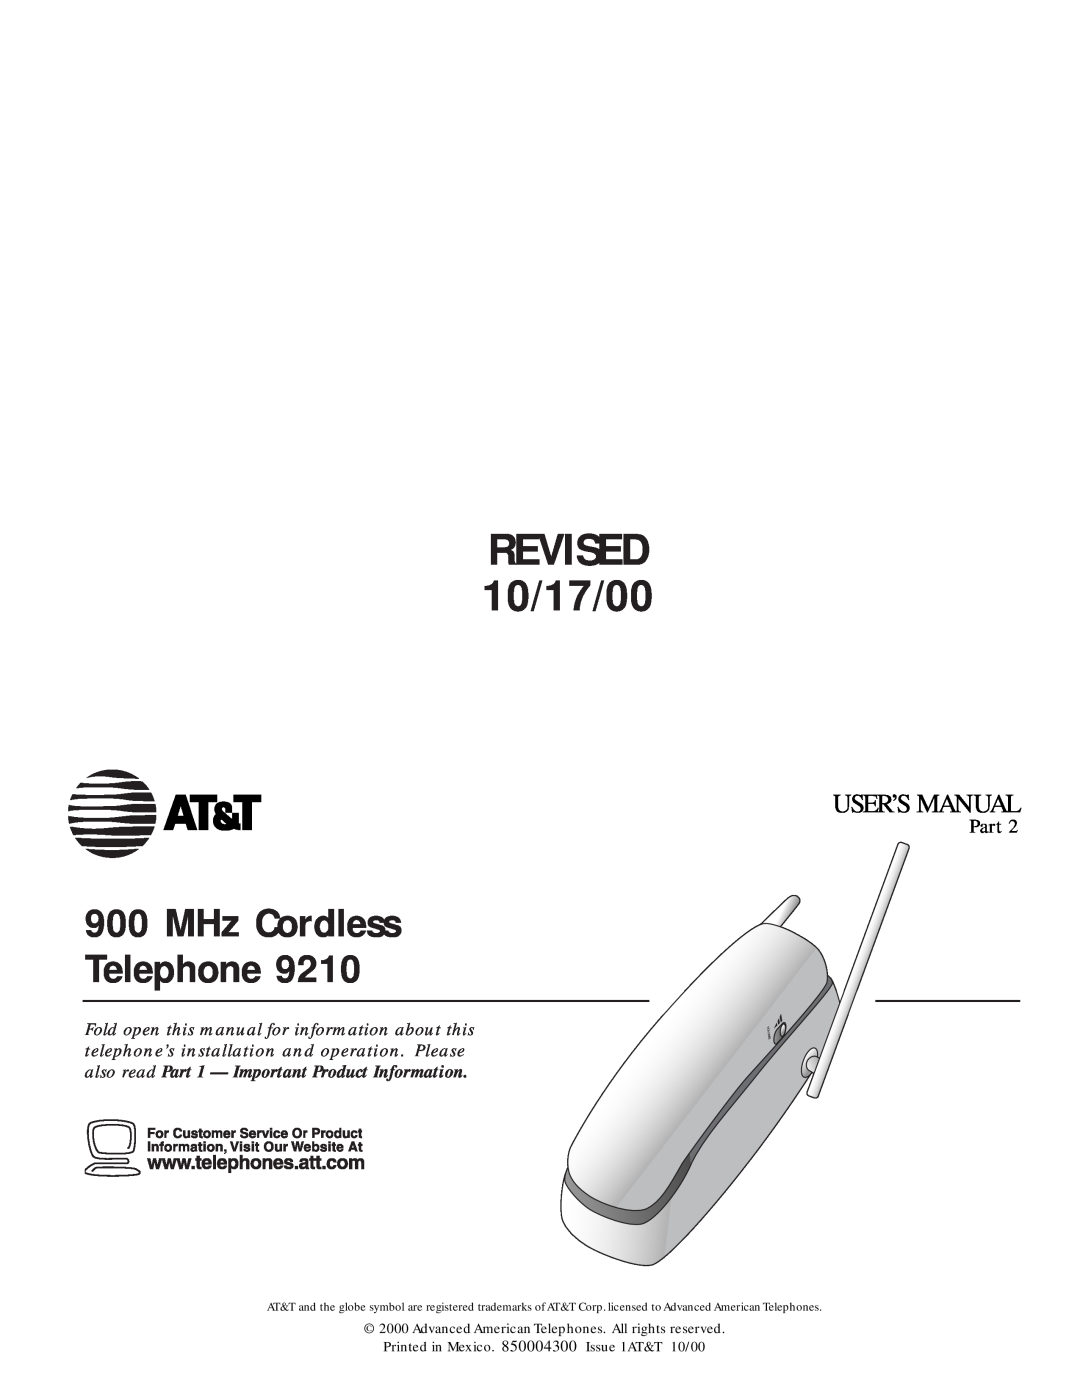 AT&T 9210 user manual also read Part 1 - Important Product Information, MHz Cordless Telephone, REVISED 10/17/00 